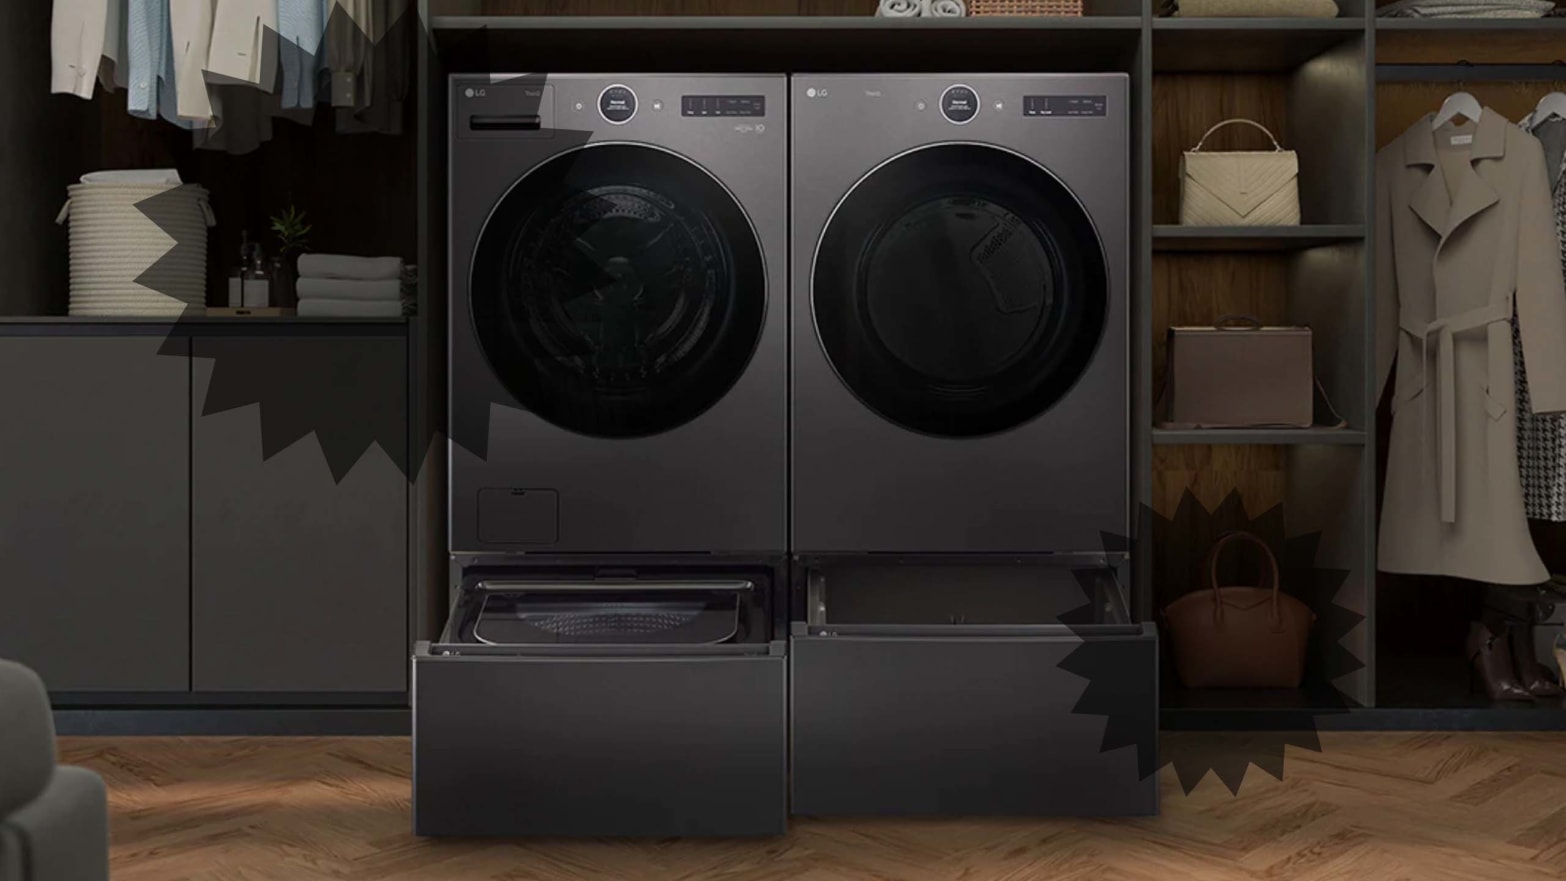 LG Smart Washer and Dryer Review